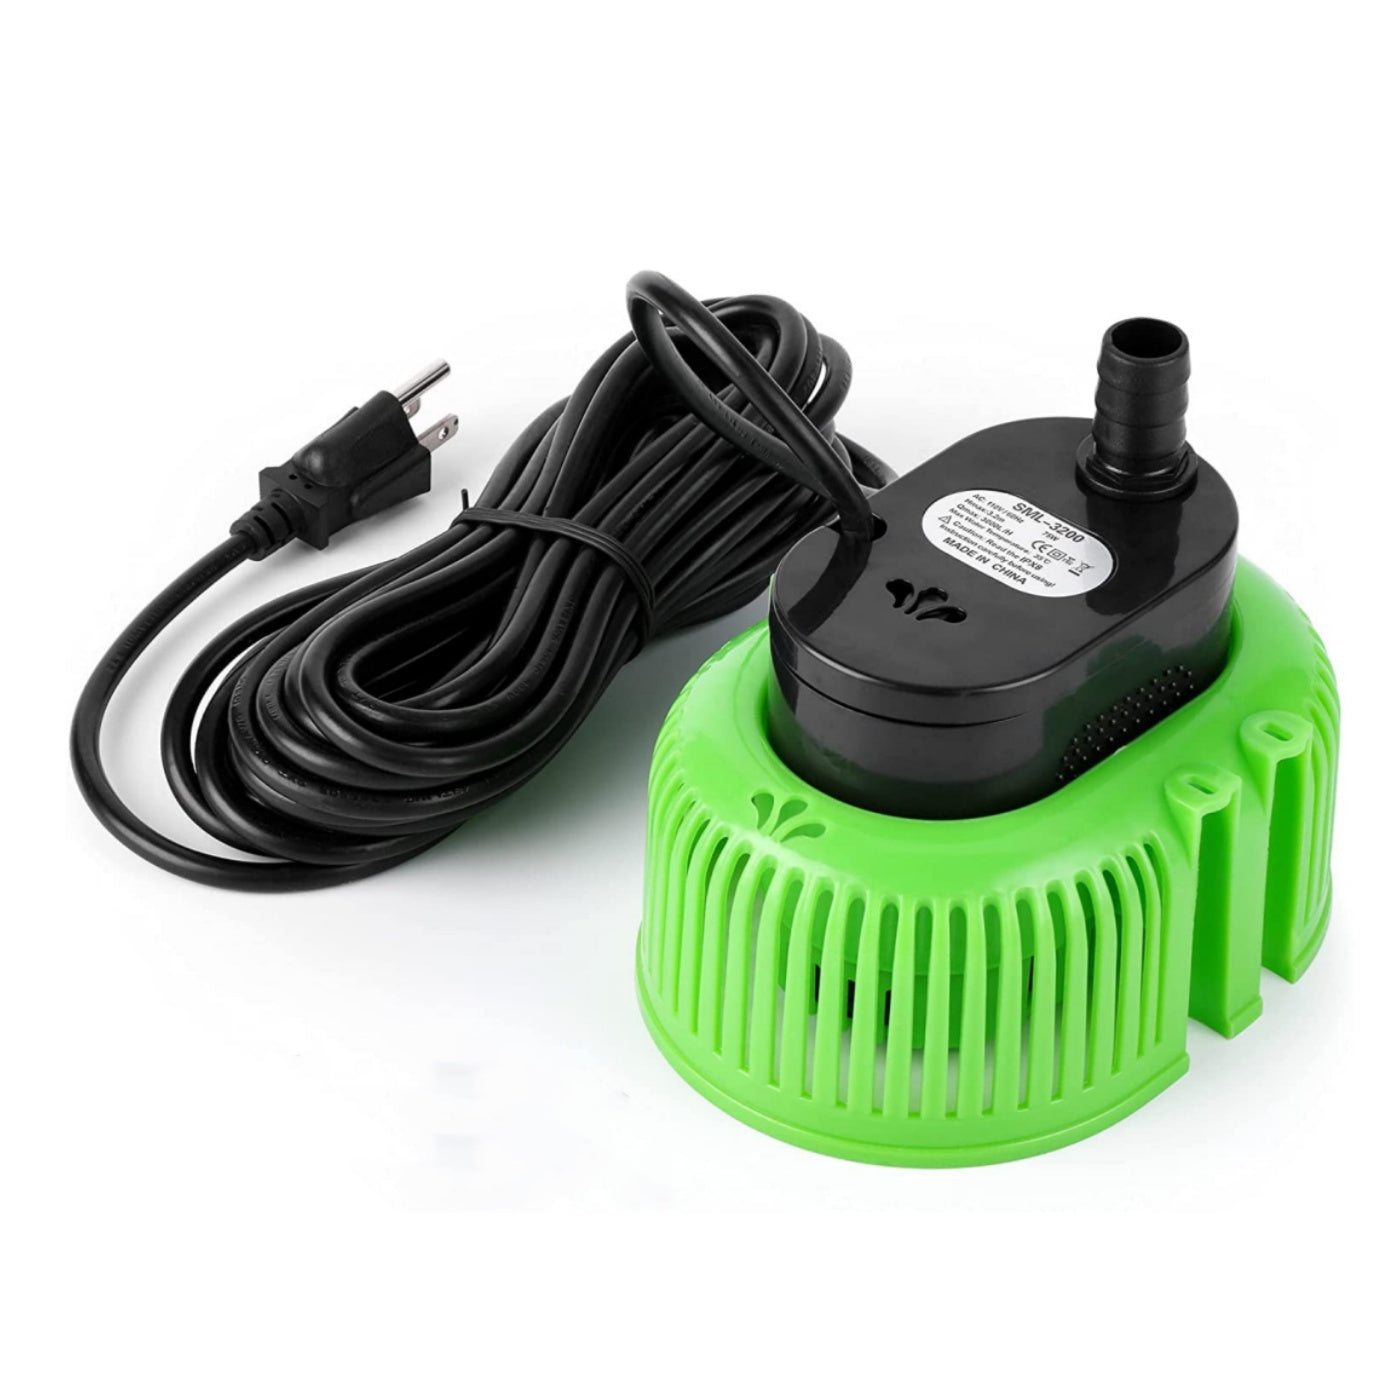 GARVEE 75W 850GPH Pool Cover Pump Above Ground, Water Pump for Pool Draining, Submersible Water Pump Sump Pump with 16 Ft Drainage Hose & 25 Ft Extra Long Power Cord Green